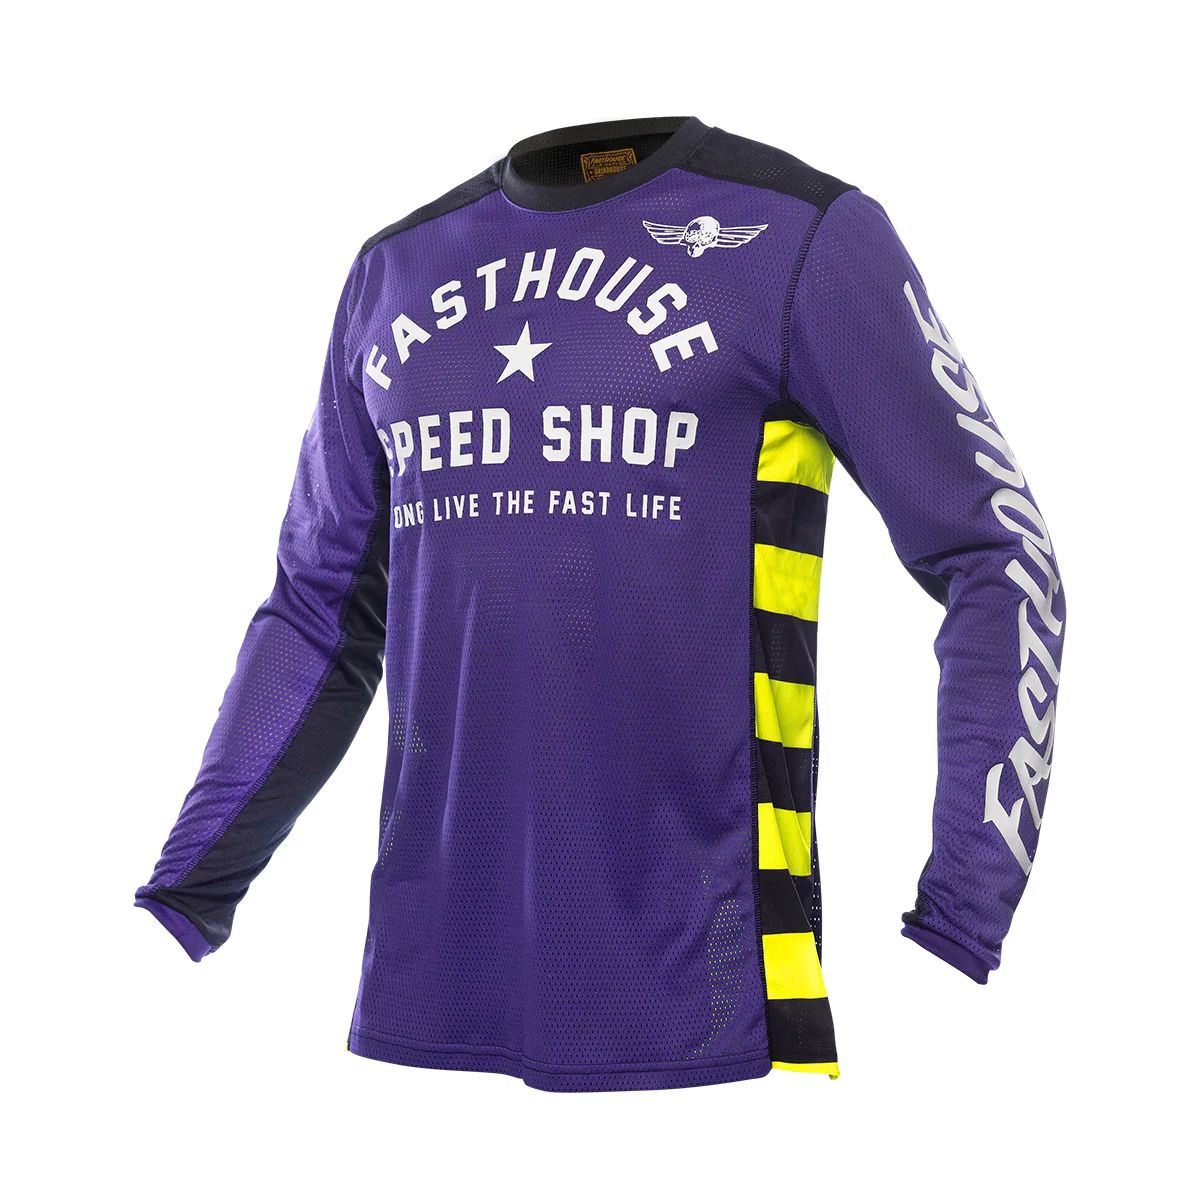 Fasthouse Youth A/C Grindhouse Originals Jersey Purple Black Bike Jerseys